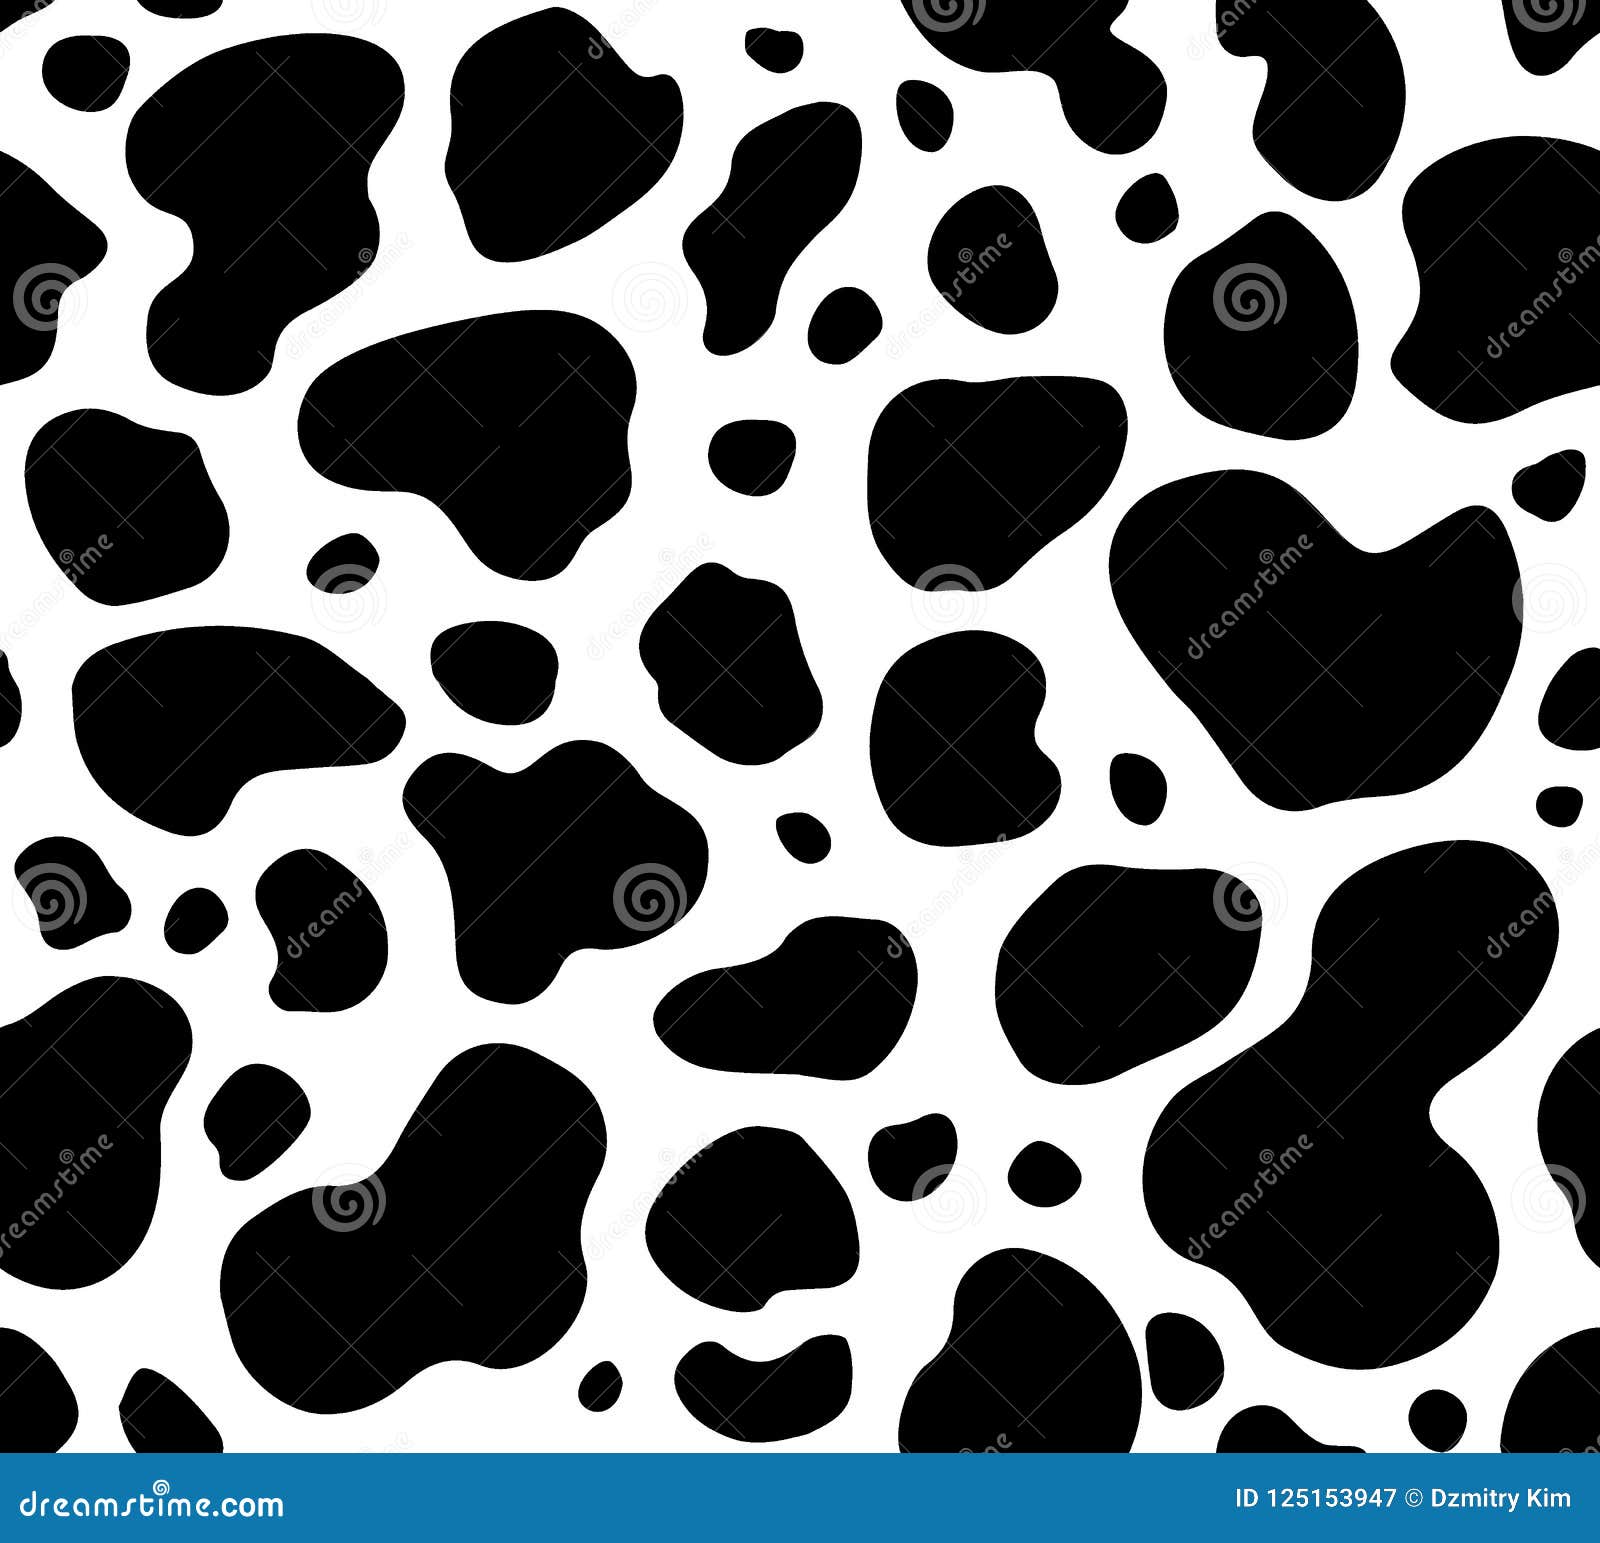 cow texture pattern repeated seamless black and white animal jungle print spot skin fur